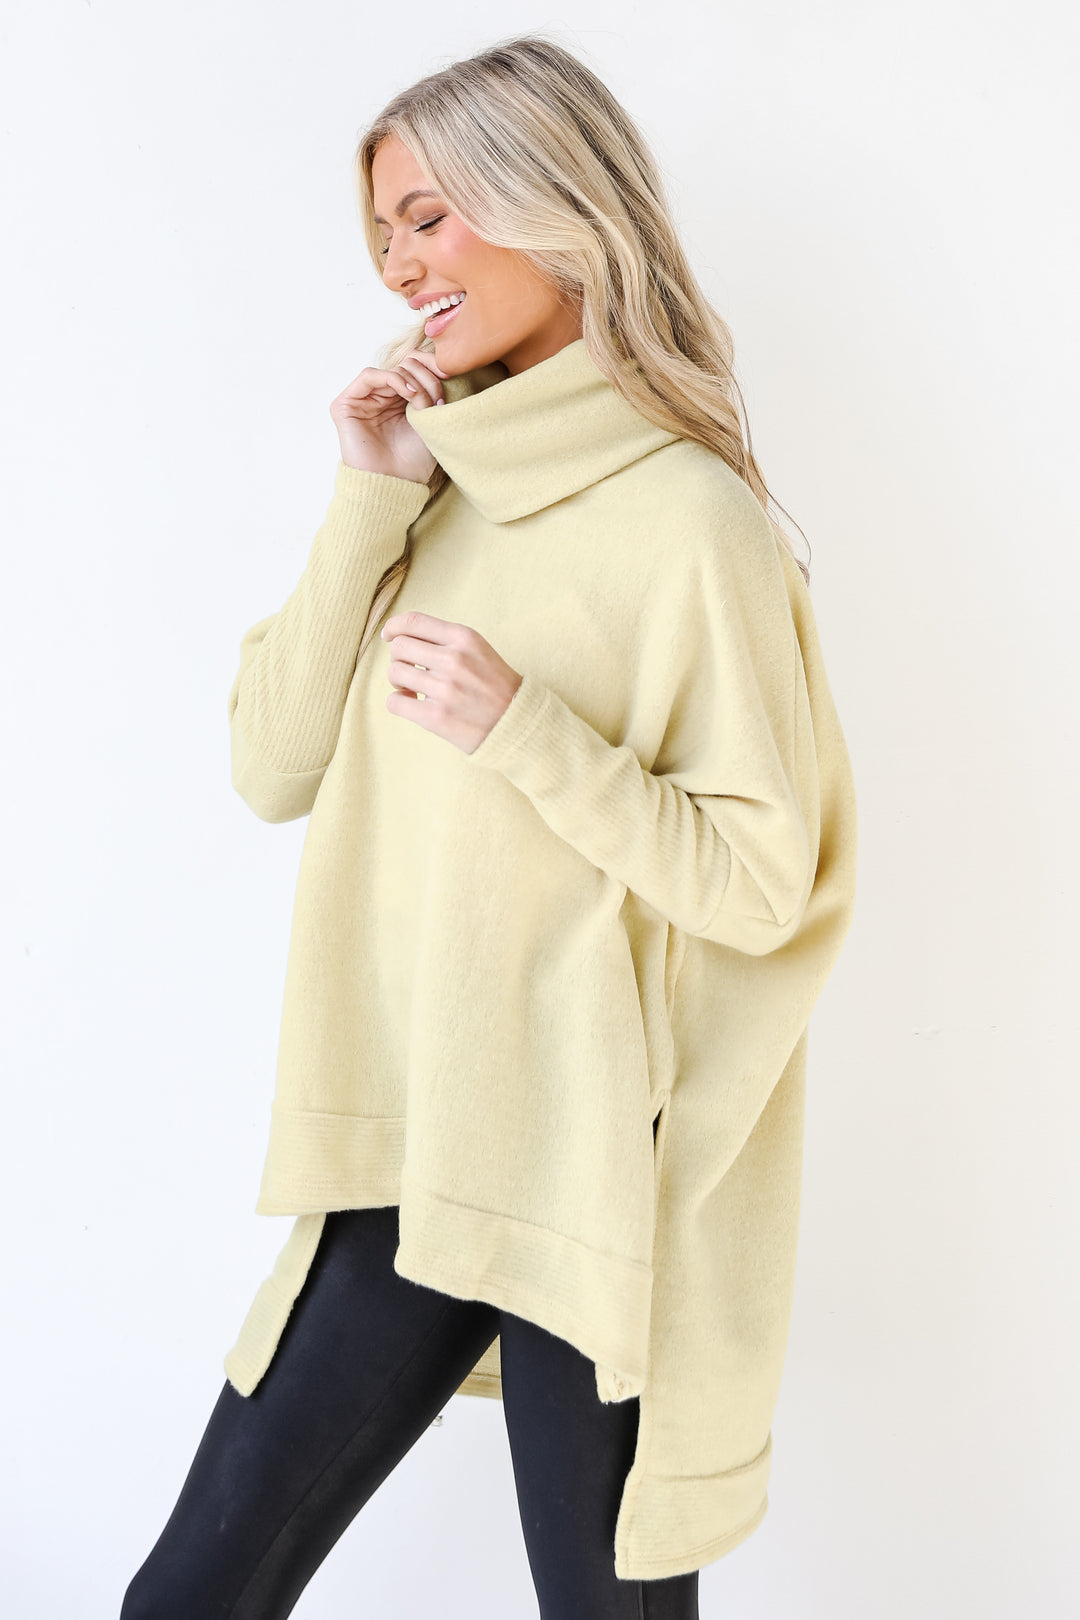 Cowl Neck Sweater in yellow side view